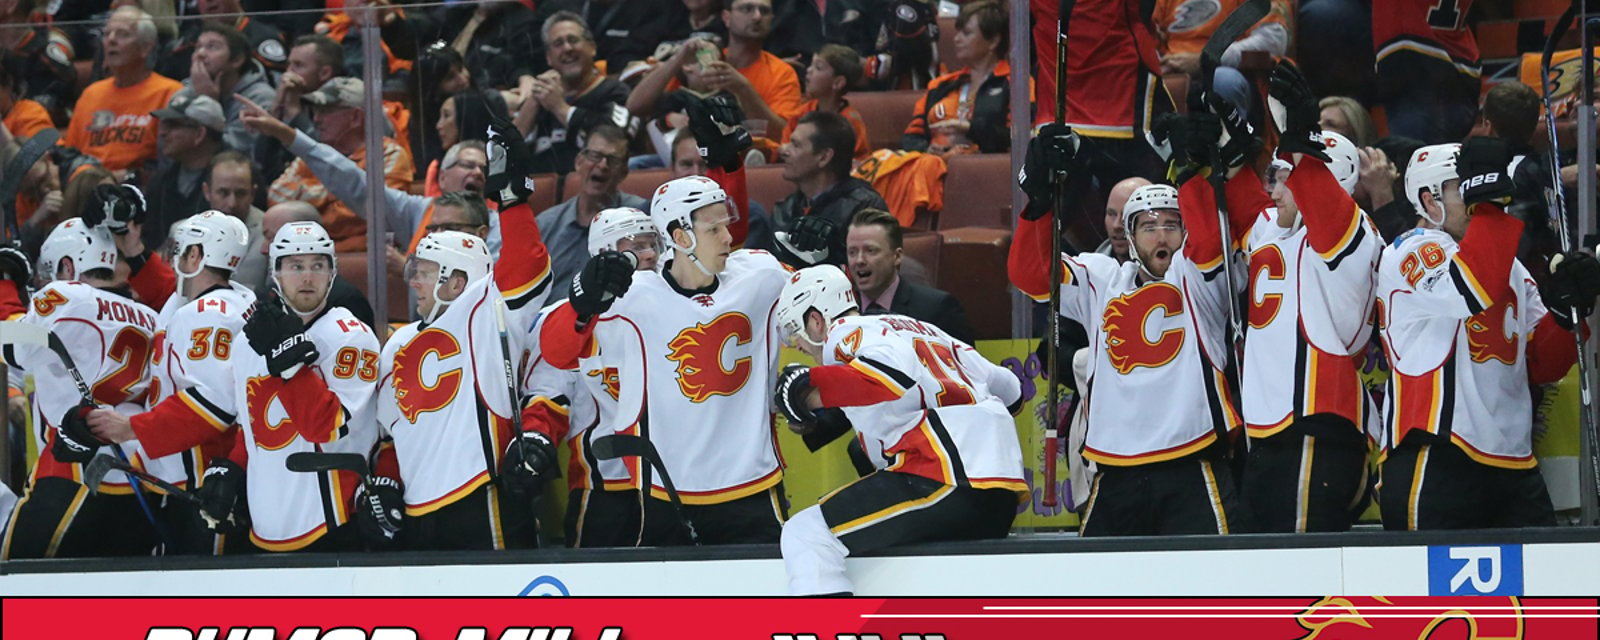 Rumor Mill: Treliving to walk away from Flames?